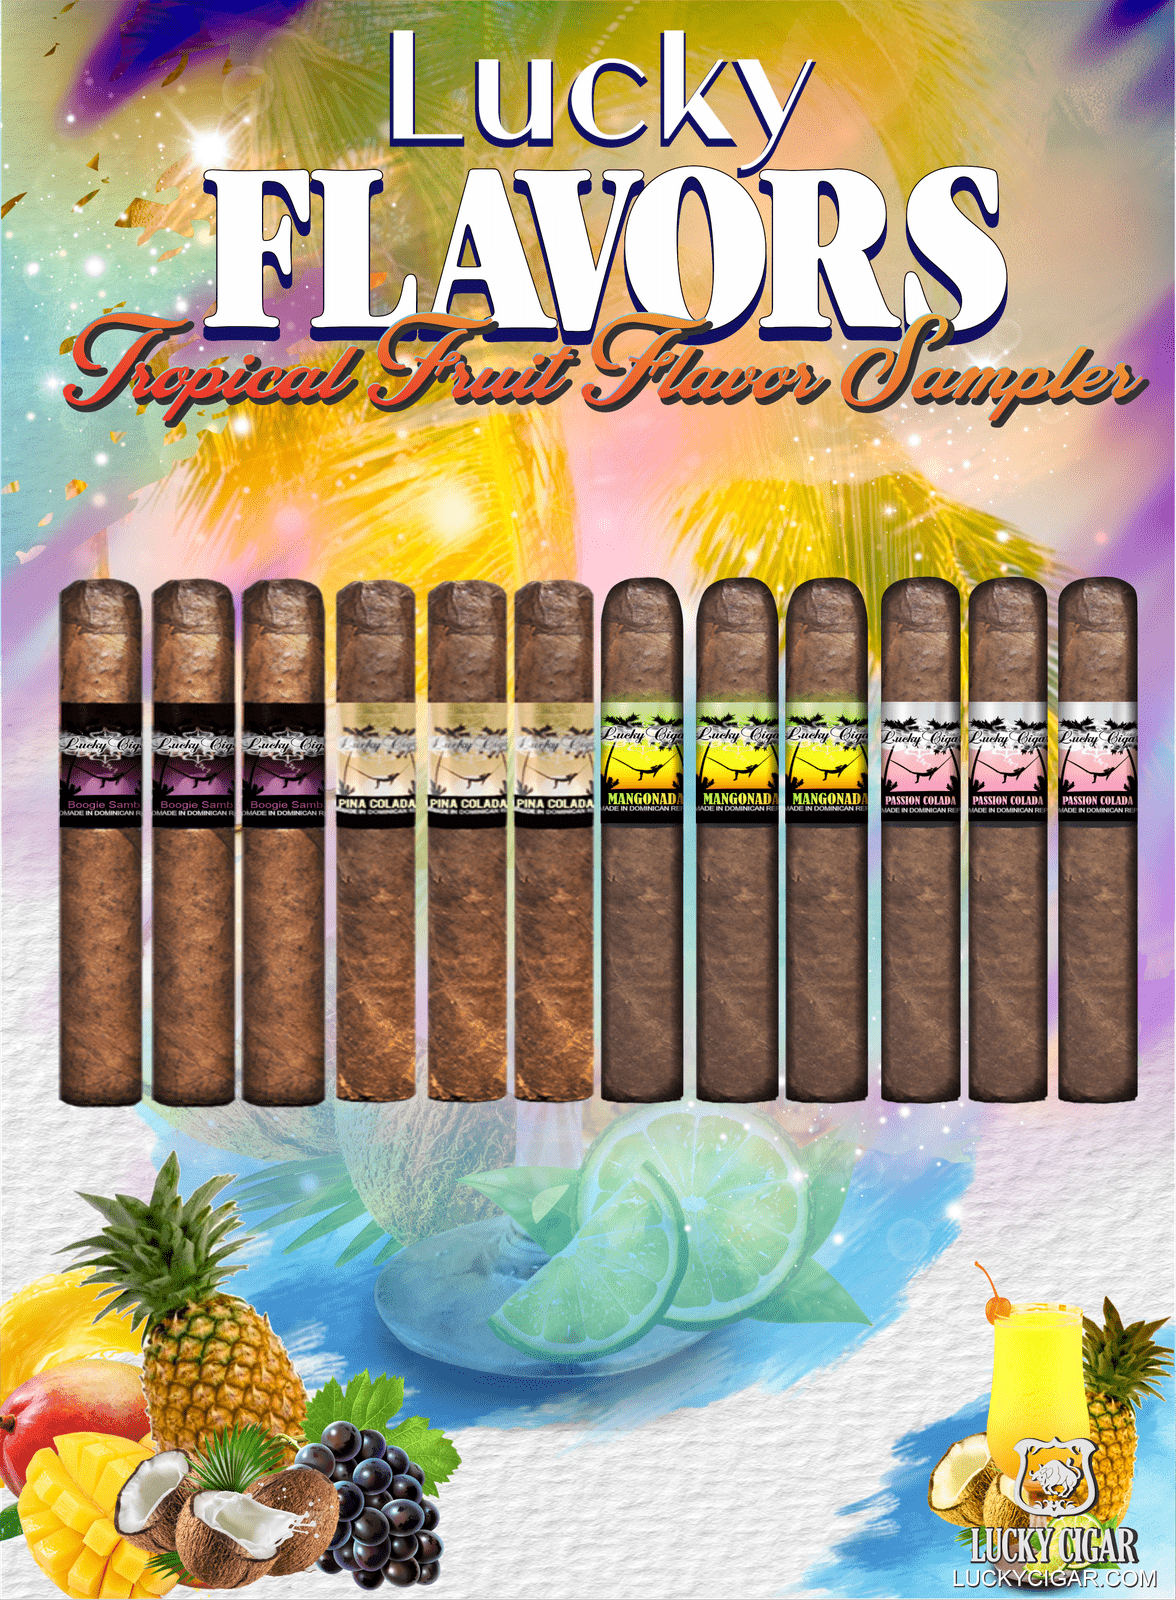 Flavored Cigars: Lucky Flavors 6 Piece Tropical Fruit Sampler - Boogie, Mangonada, Pina, Passion 3 Boogie Samba 5x42 Cigars 3 Mangonada 5x42 Cigars 3 Pina Colada 5x42 Cigars 3 Passion Colada 5x42 Cigars